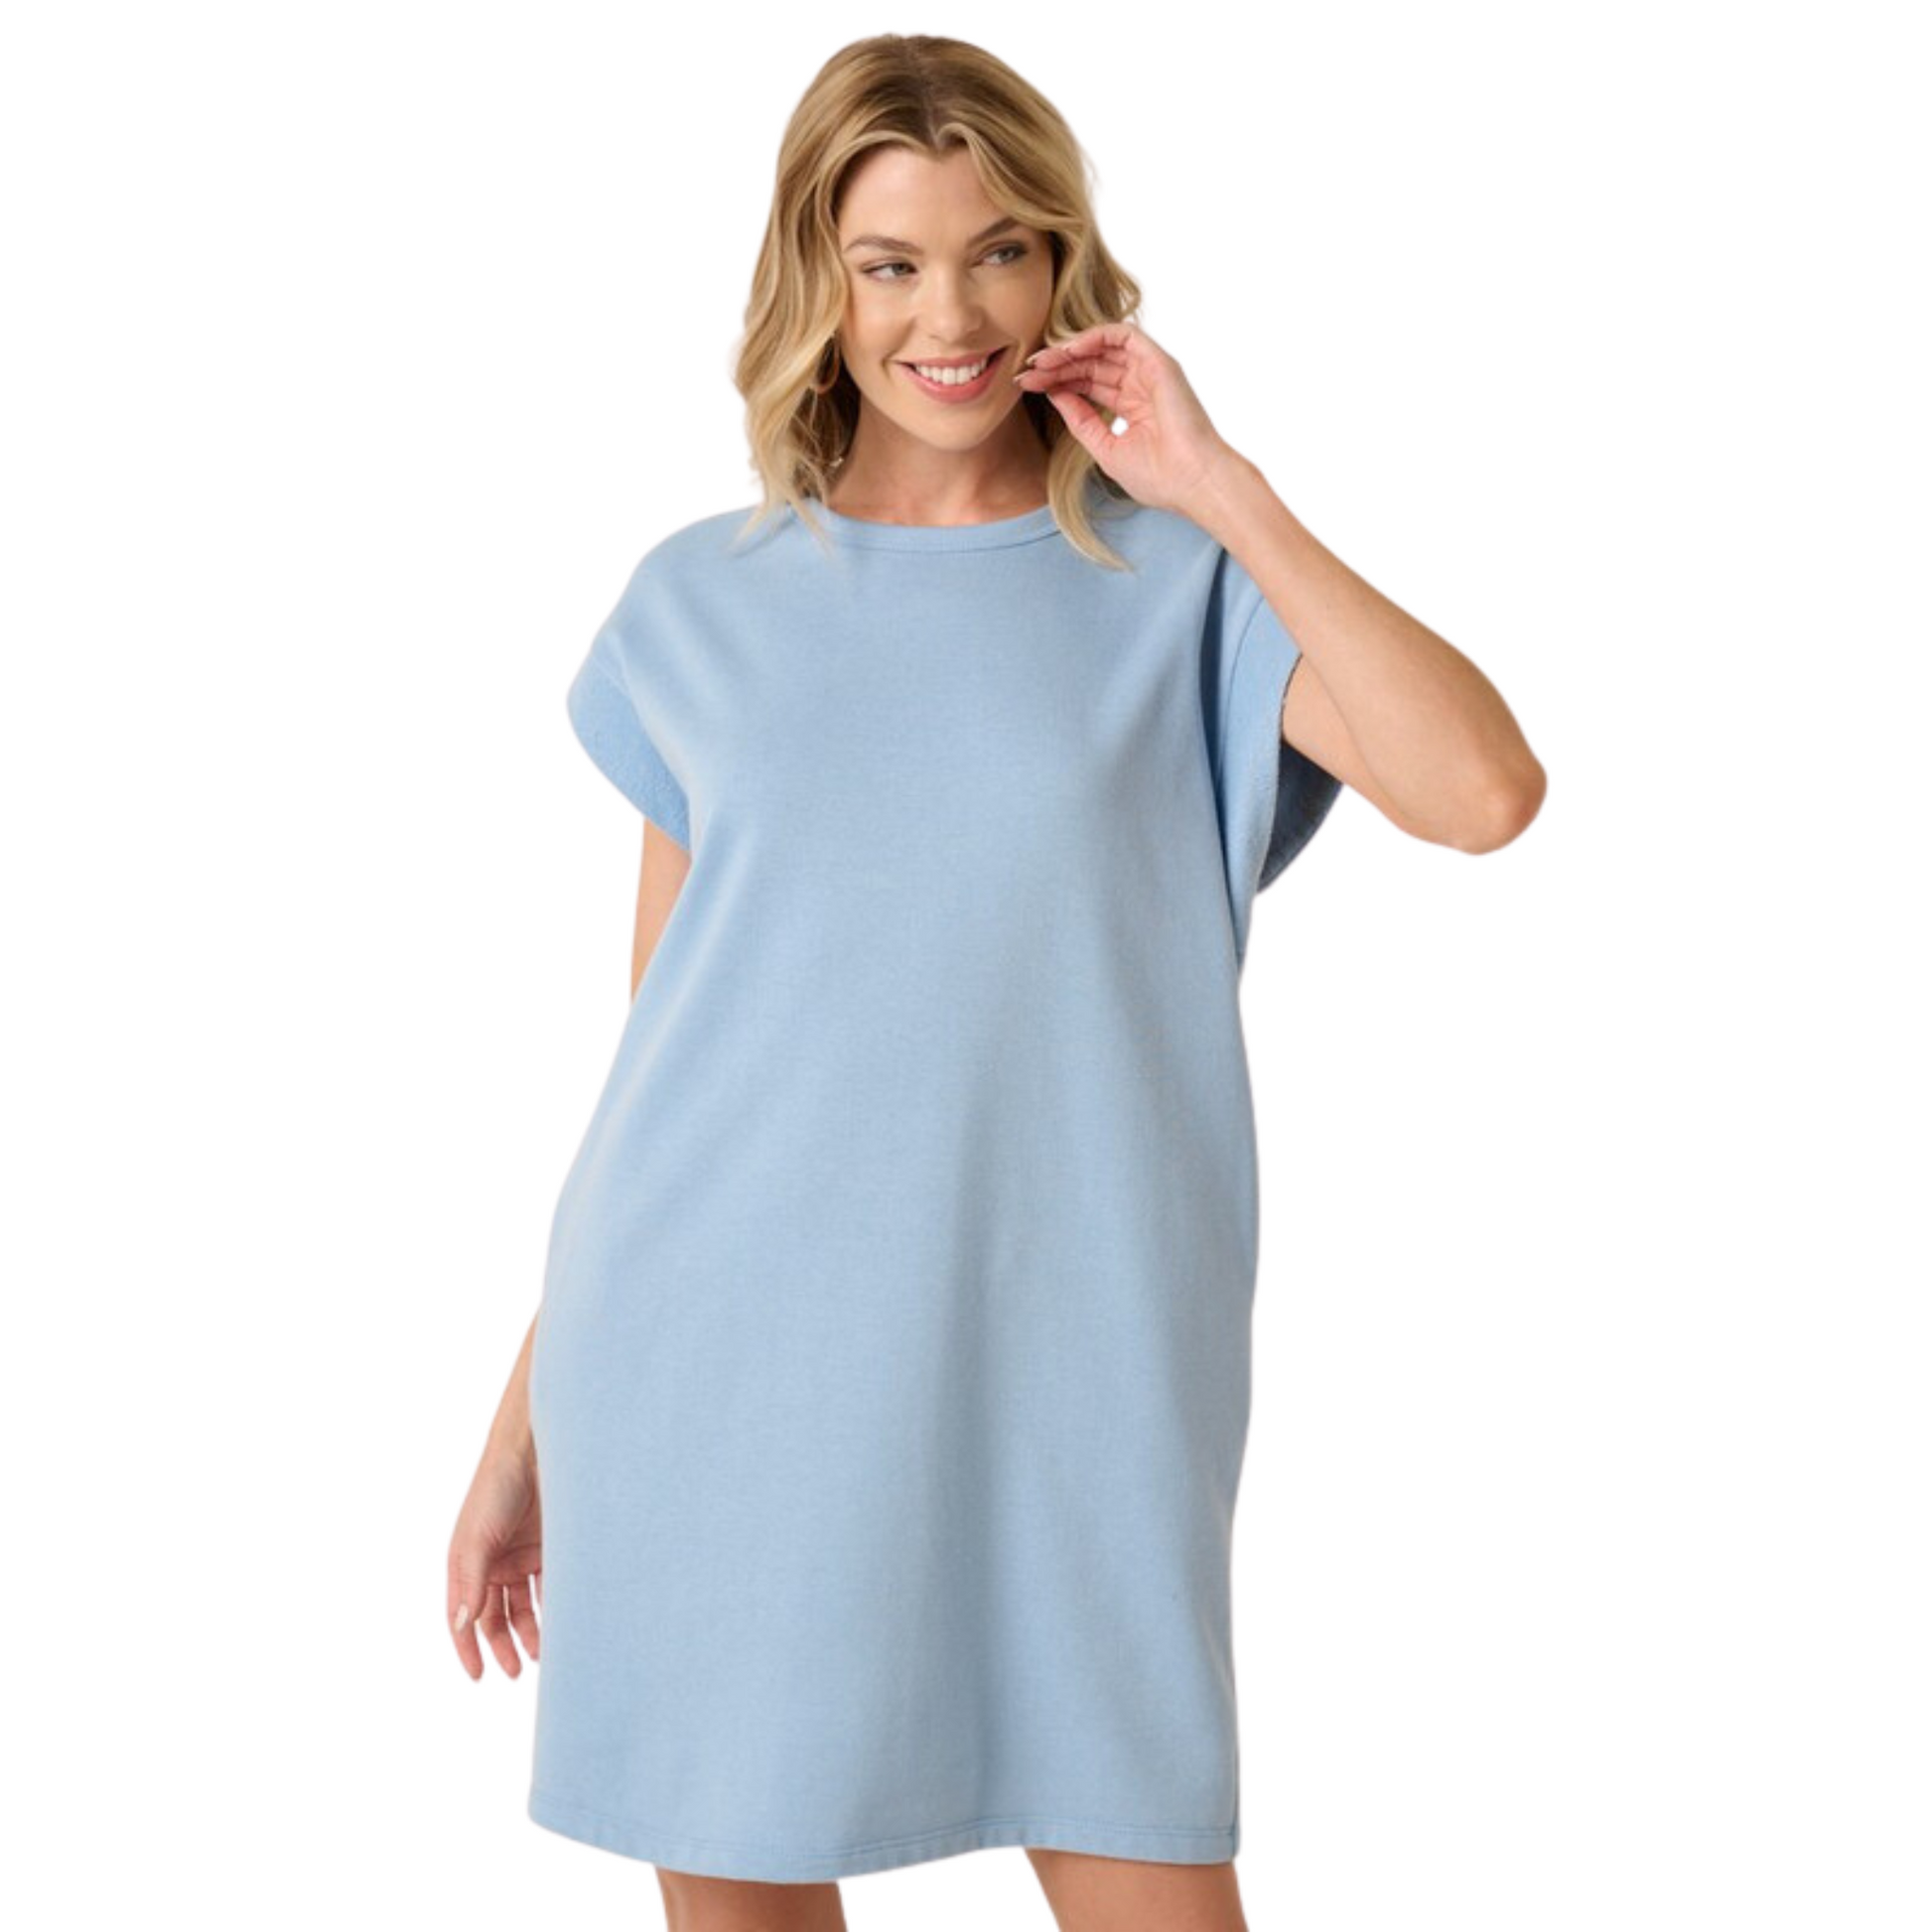 Crafted in a luxe French Terry, this mini dress comes in perfect Pink, Blue, and Black hues. It's designed with a classic sweatshirt dress silhouette and short sleeves, perfect for casual weekend days and laid-back office looks.